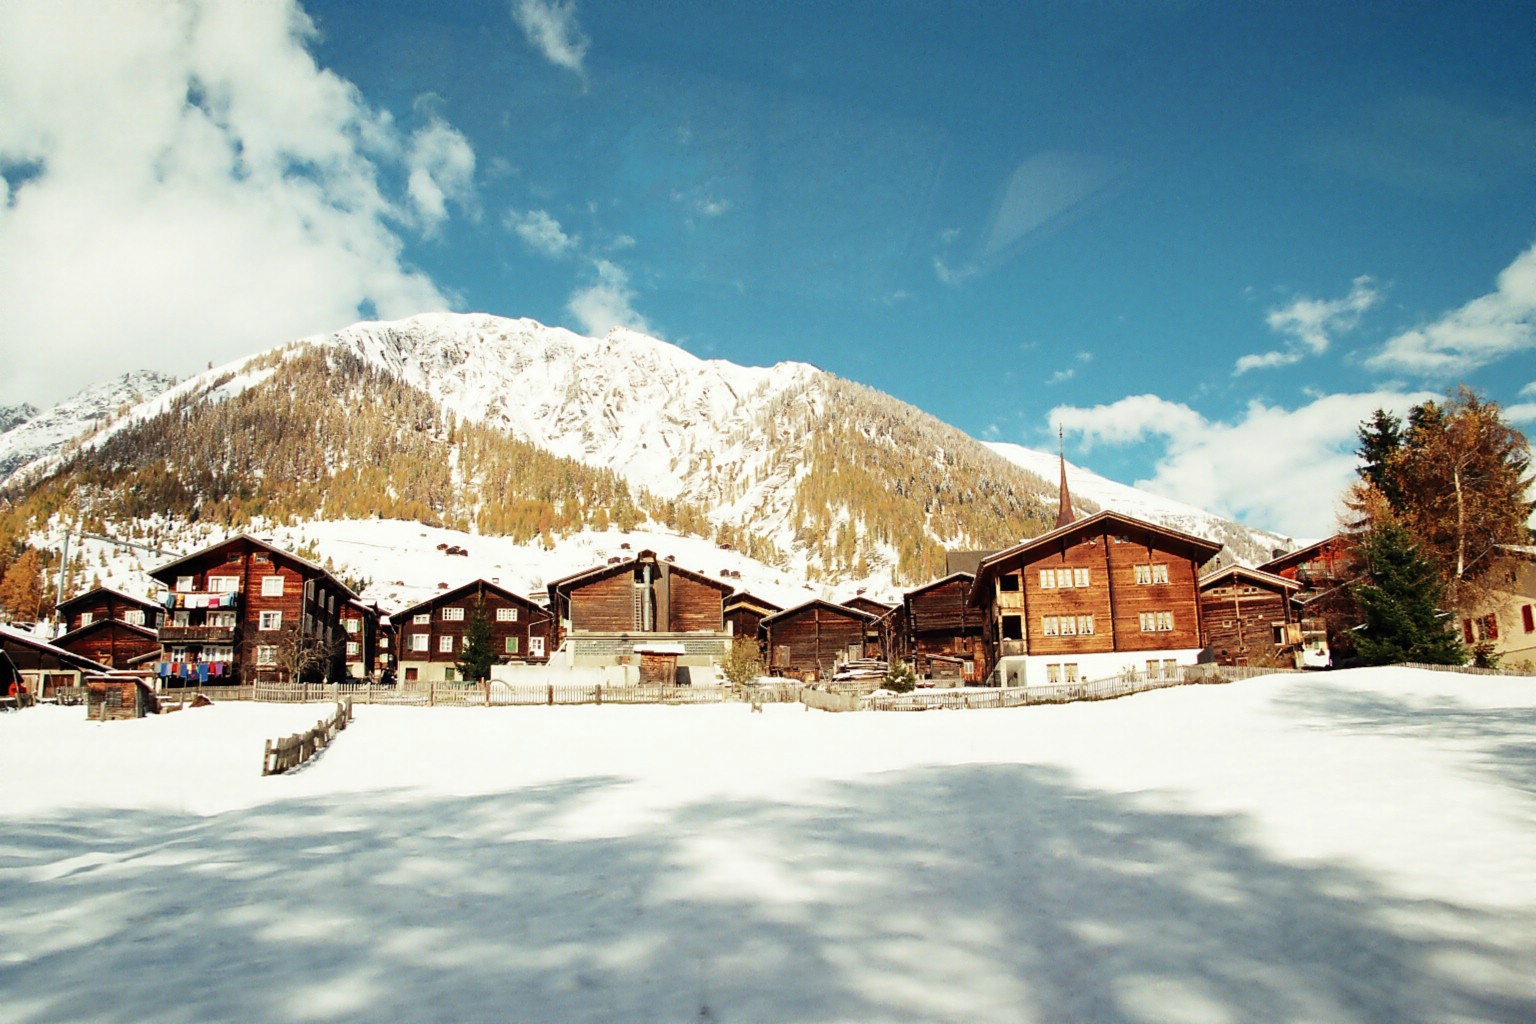 several wooden buildings in a snowy field with mountains in the background